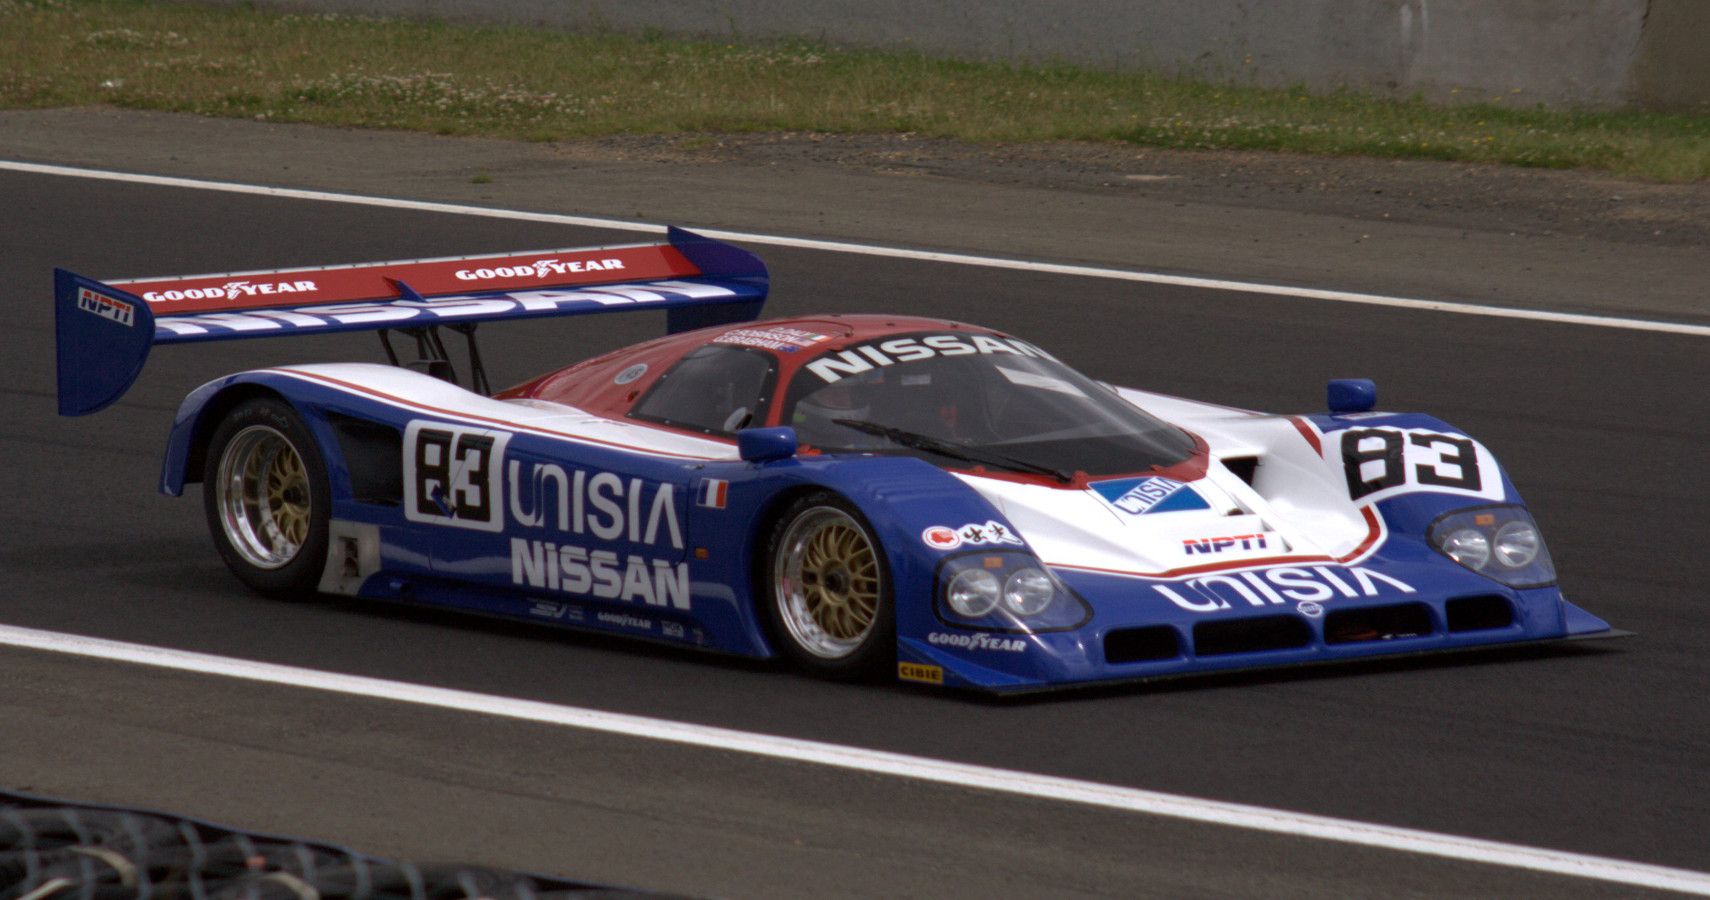 Nissan has been hunting for a win at Le Mans